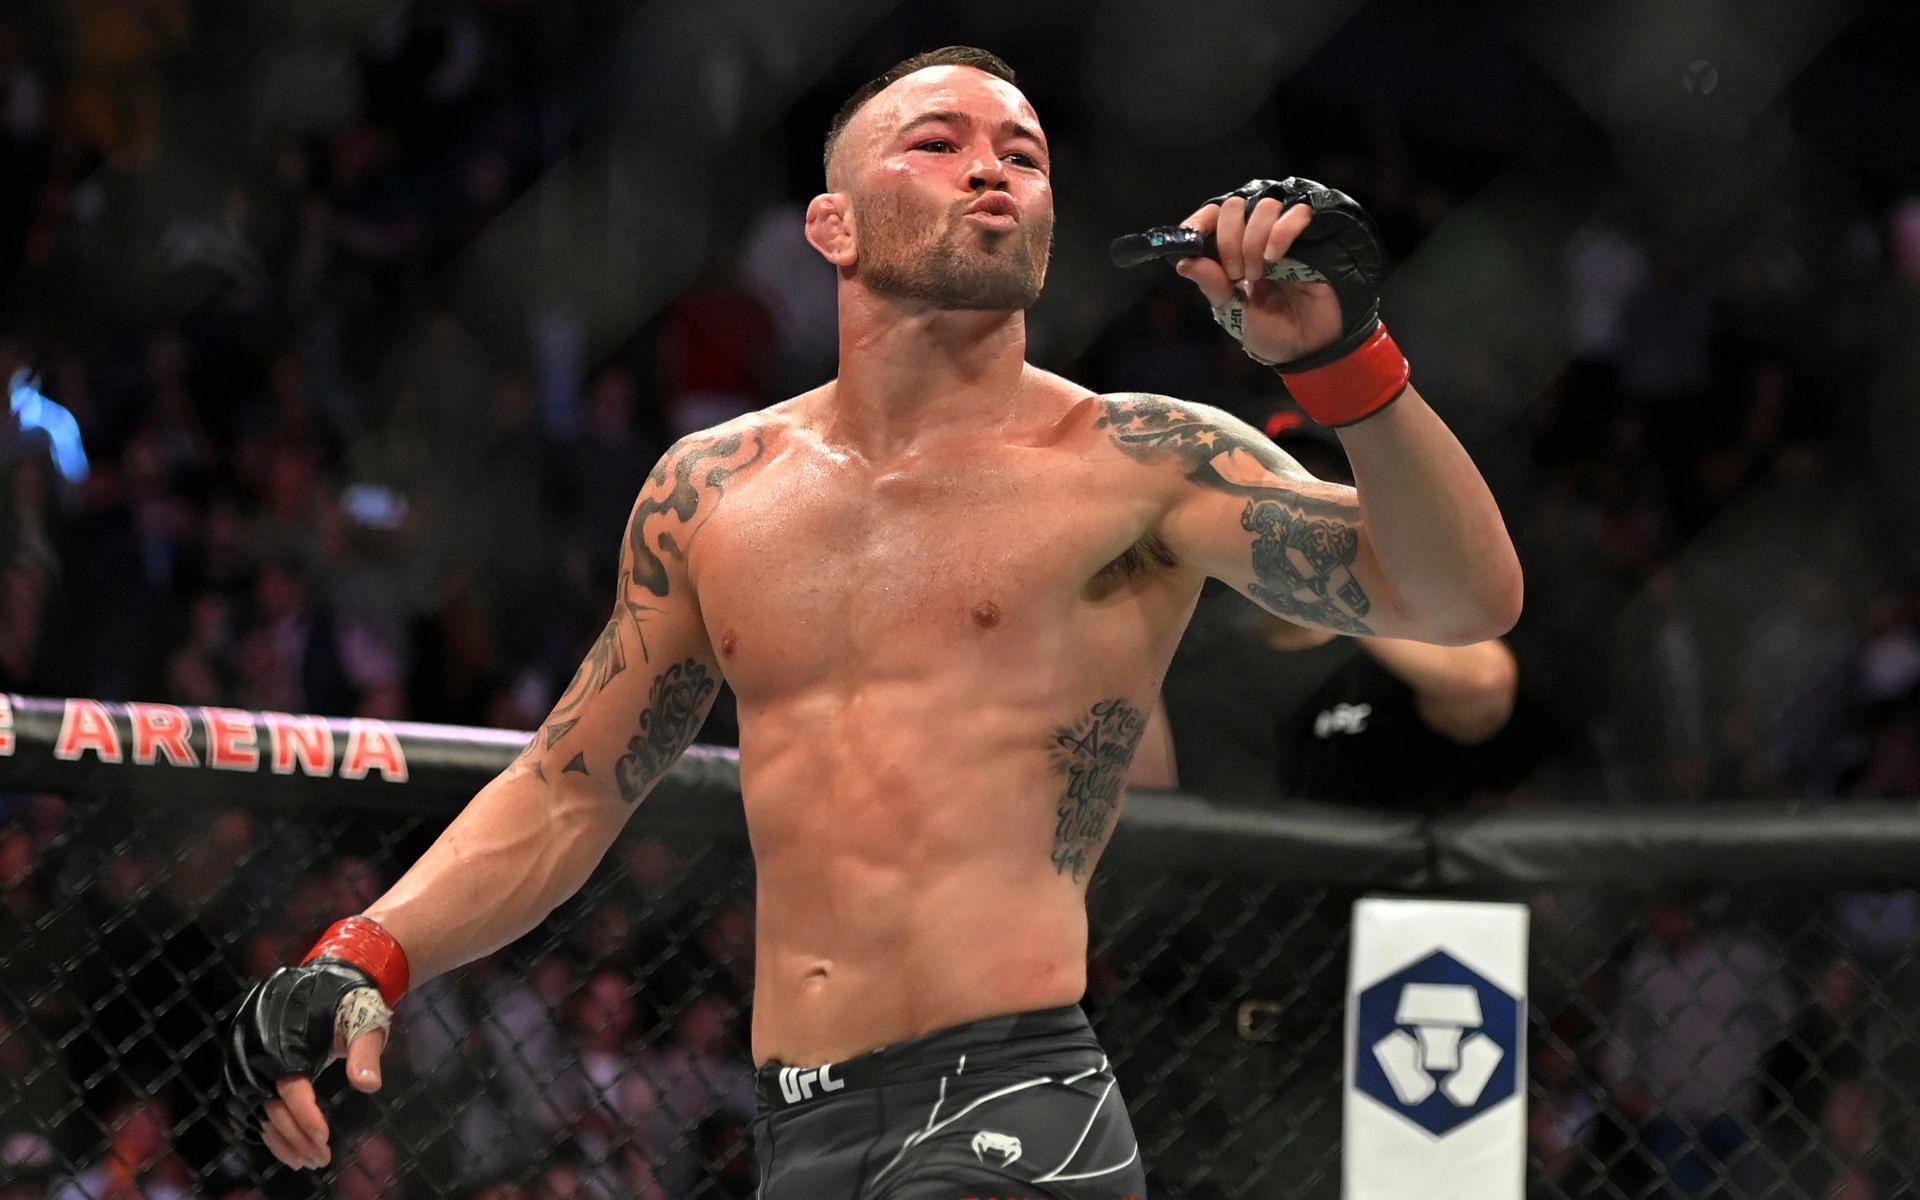 Colby Covington recently called out the smaller Dustin Poirier for a fight in the future